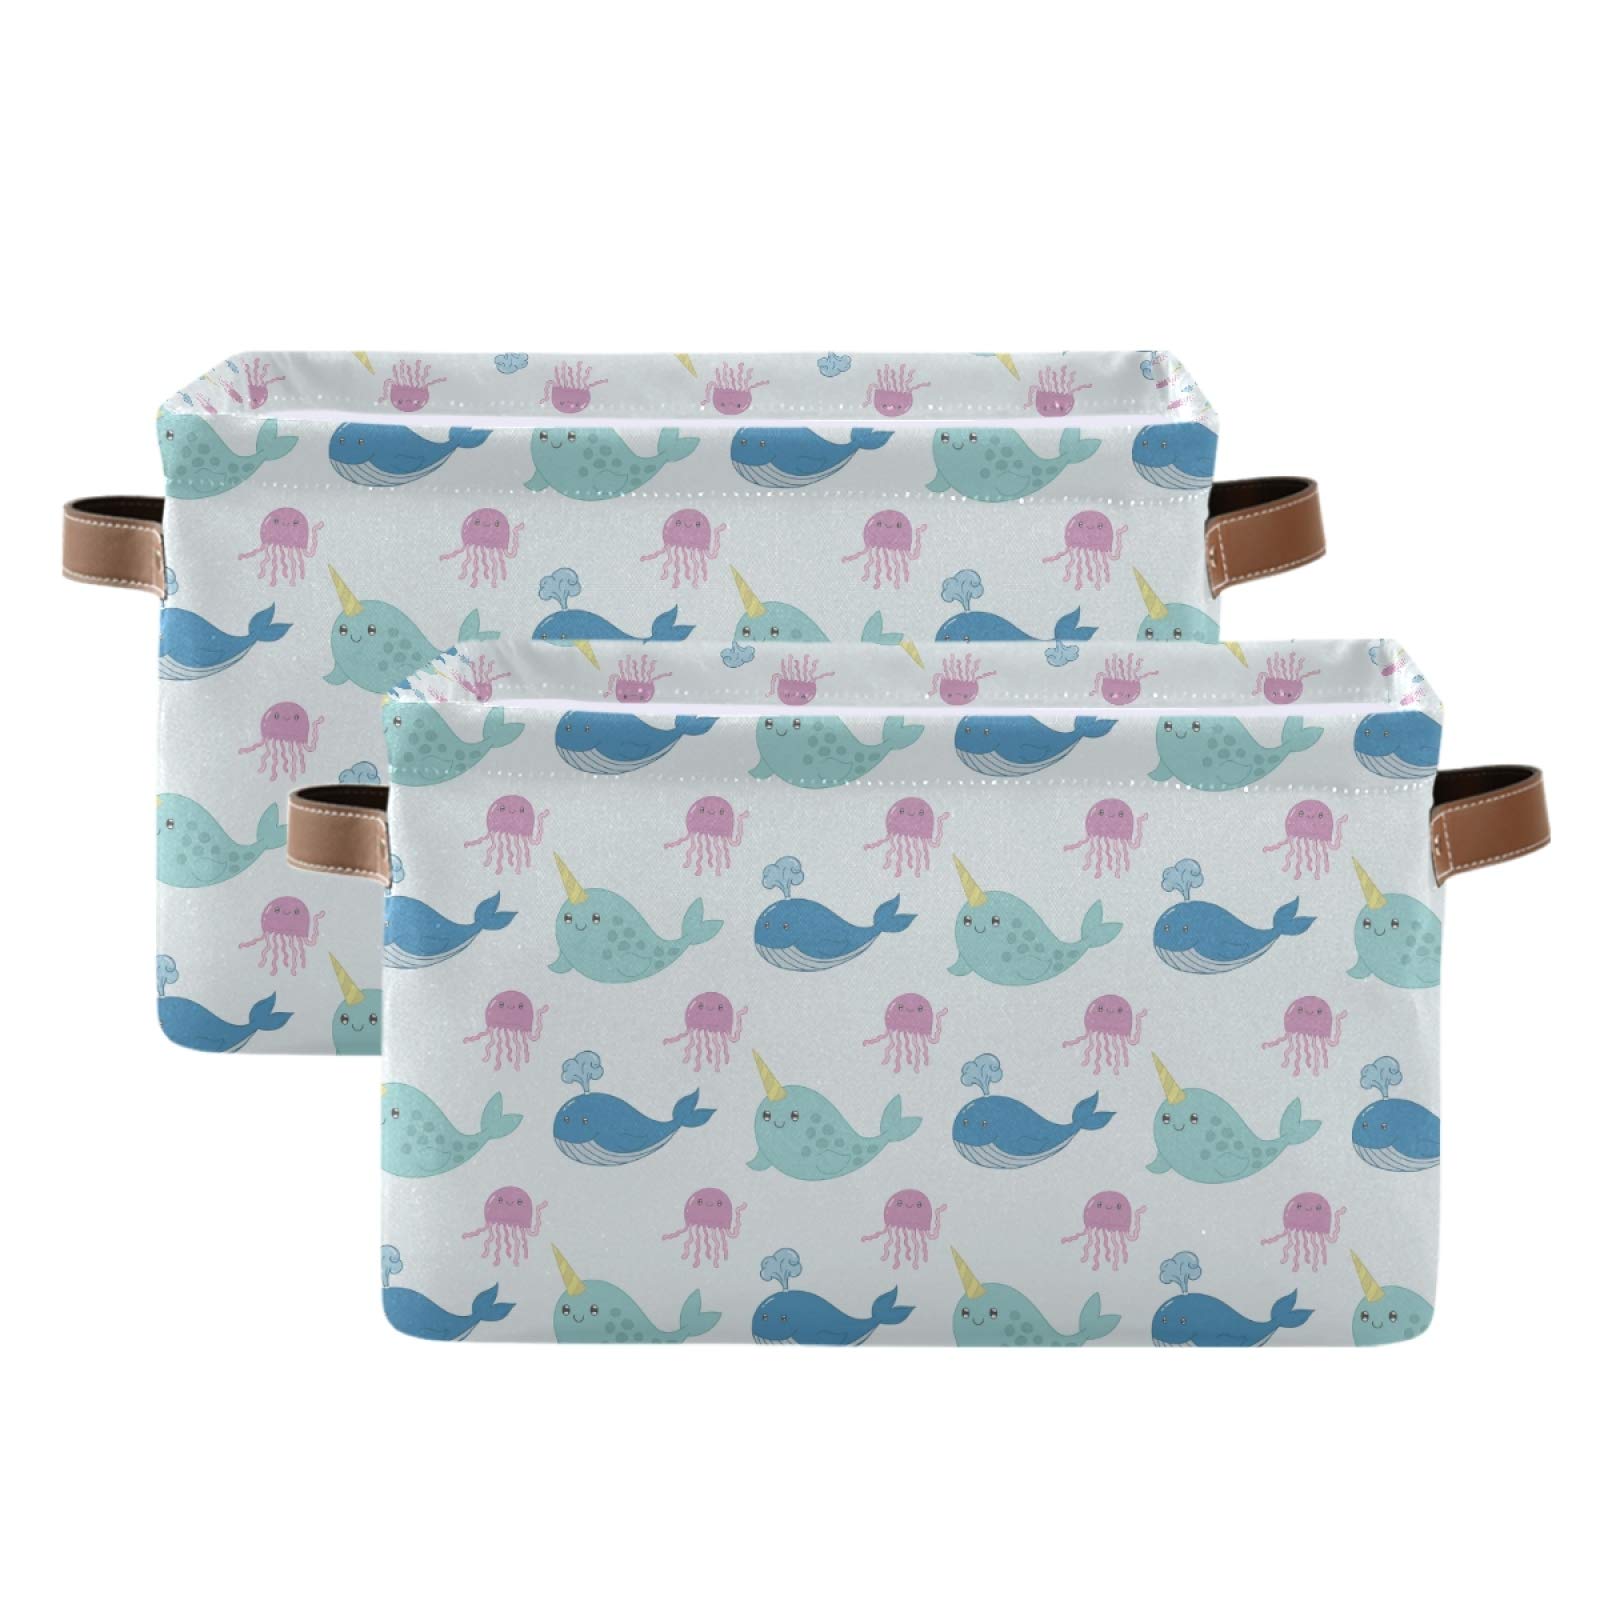 senya Large Foldable Storage Basket with Handles, Jellyfish Whale Narwhal Fabric Collapsible Storage Bins Organizer Bag for Baby Storage Toy Storage 15 x 11 x 9.5 inch